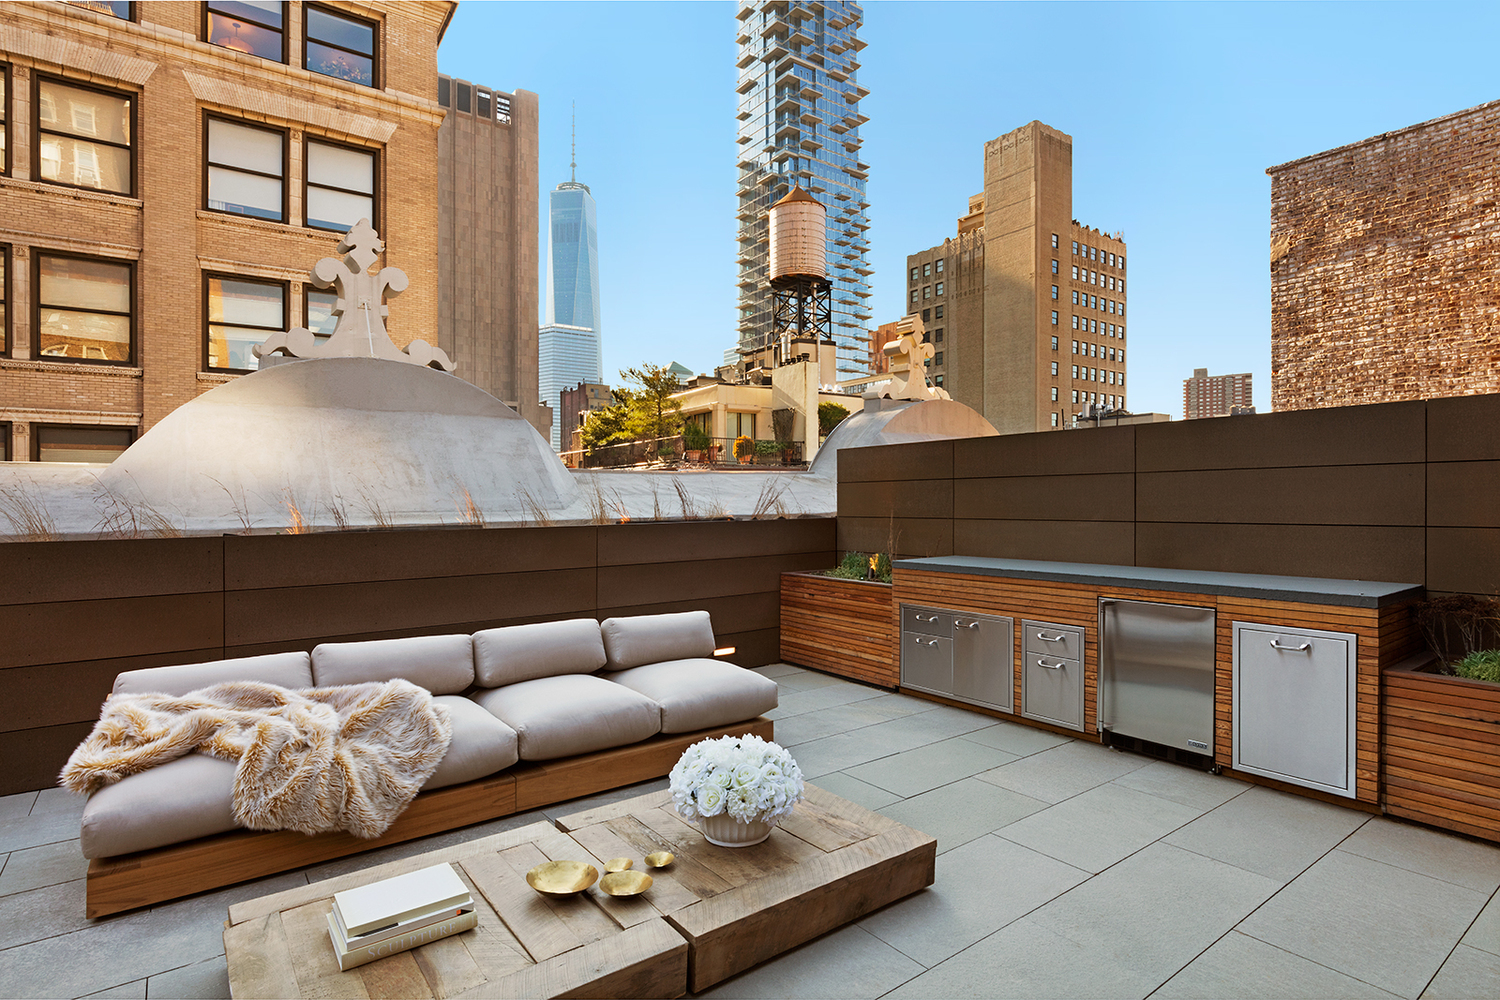 Lounge area with bar, sofa, and coffee table on the rooftop of a luxury residential building surrounded by New York skyscrapers. MEP designed by 2L Engineering.